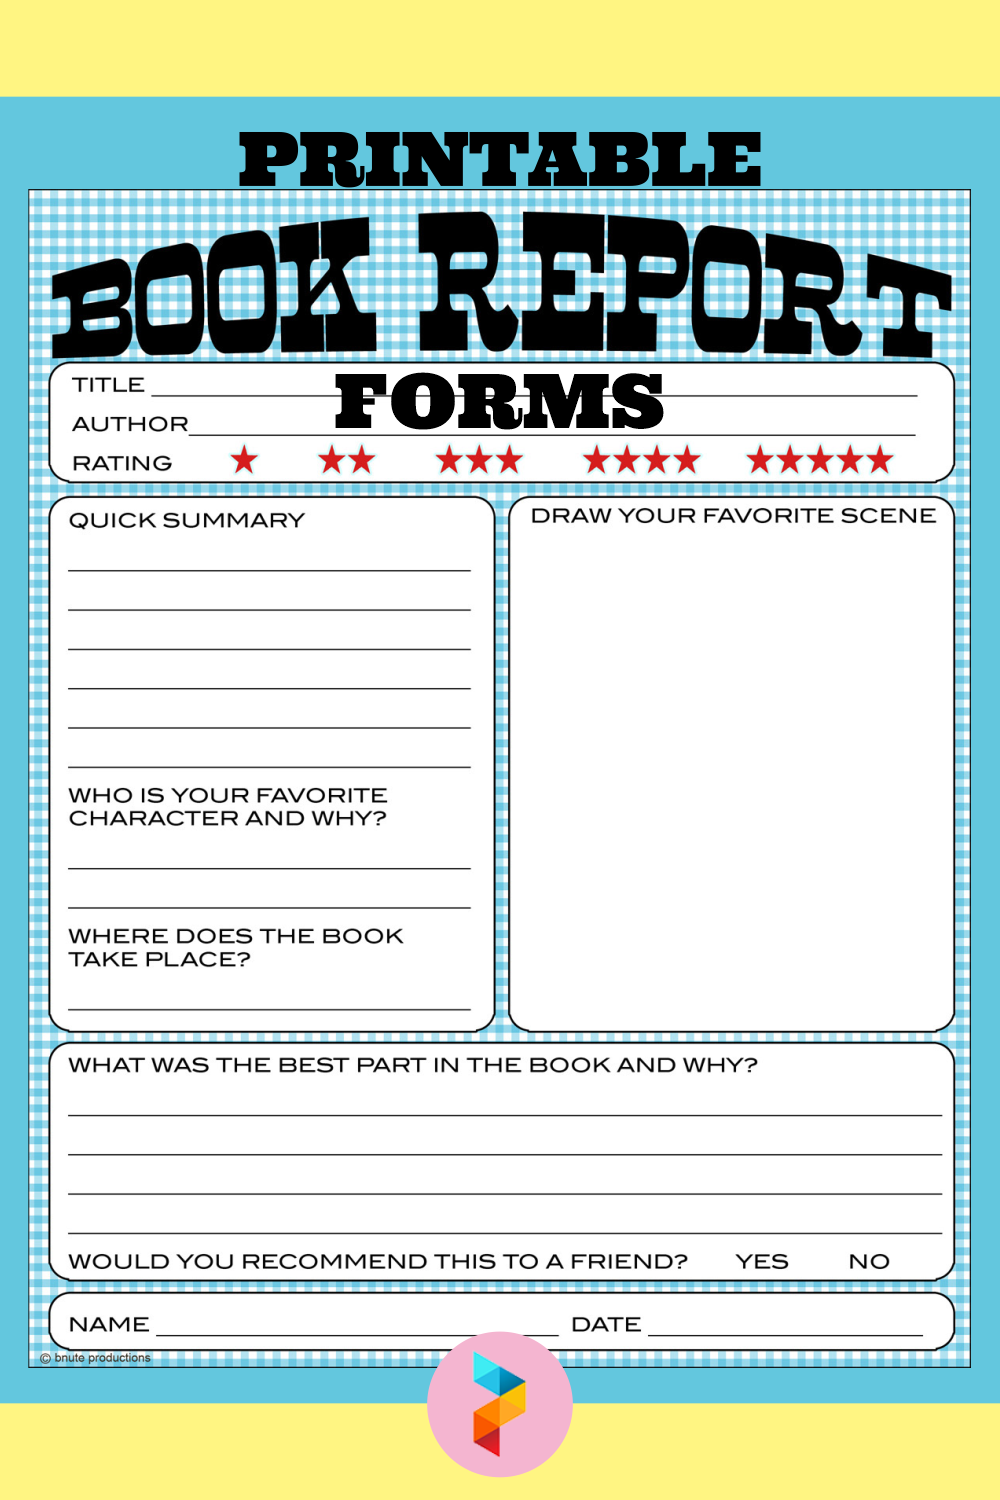 22 Best Free Printable Book Report Forms - printablee.com For High School Book Report Template